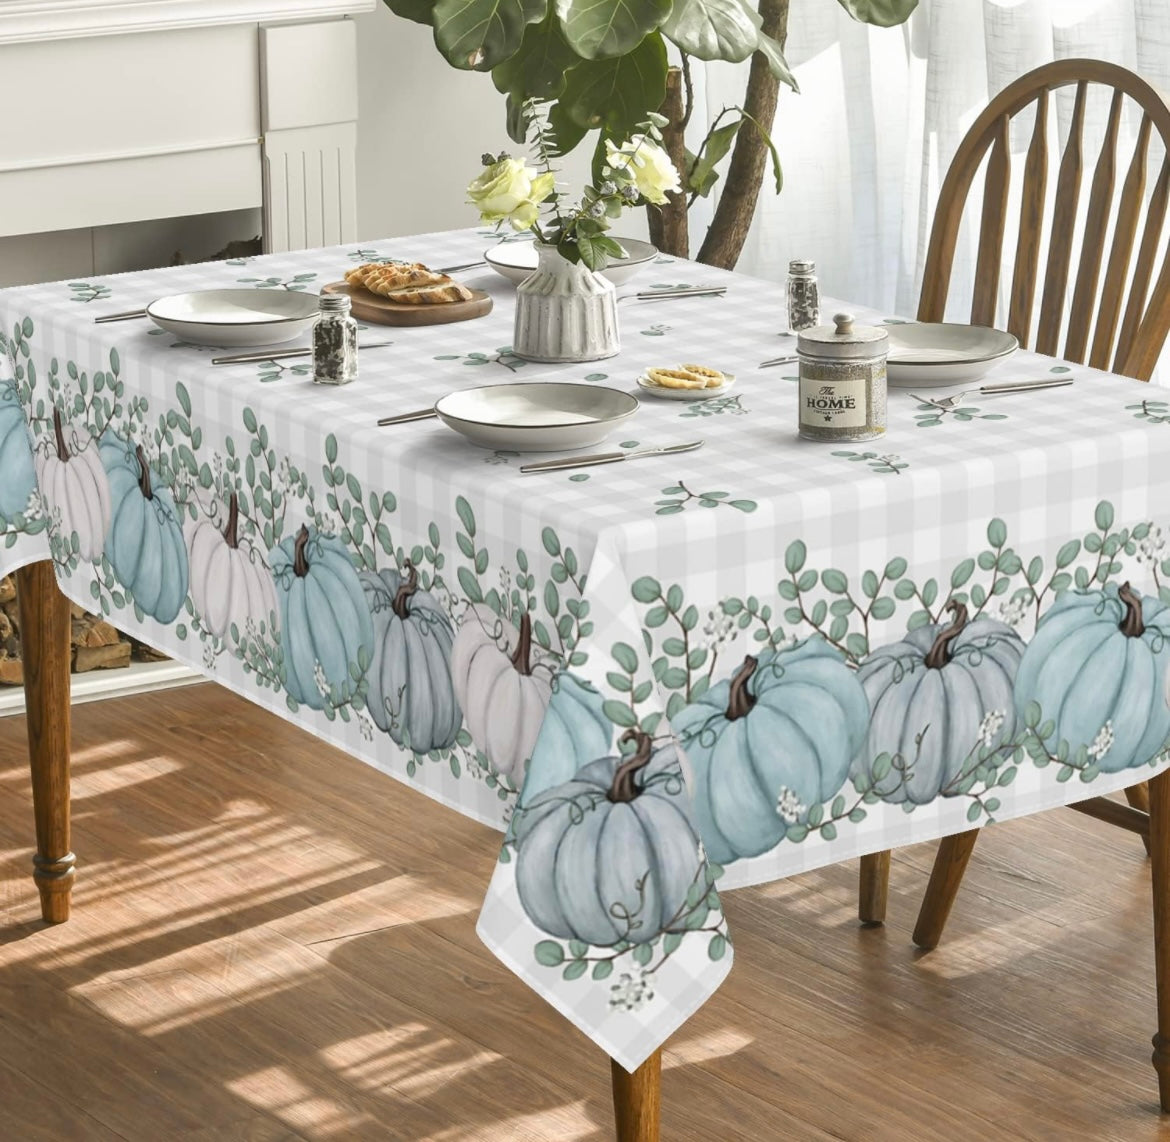 Horaldaily Fall Tablecloth 60x84 Inch Rectangular, Thanksgiving Autumn Harvest Blue Pumpkin Buffalo Plaid Table Cover for Party Picnic Dinner Decor